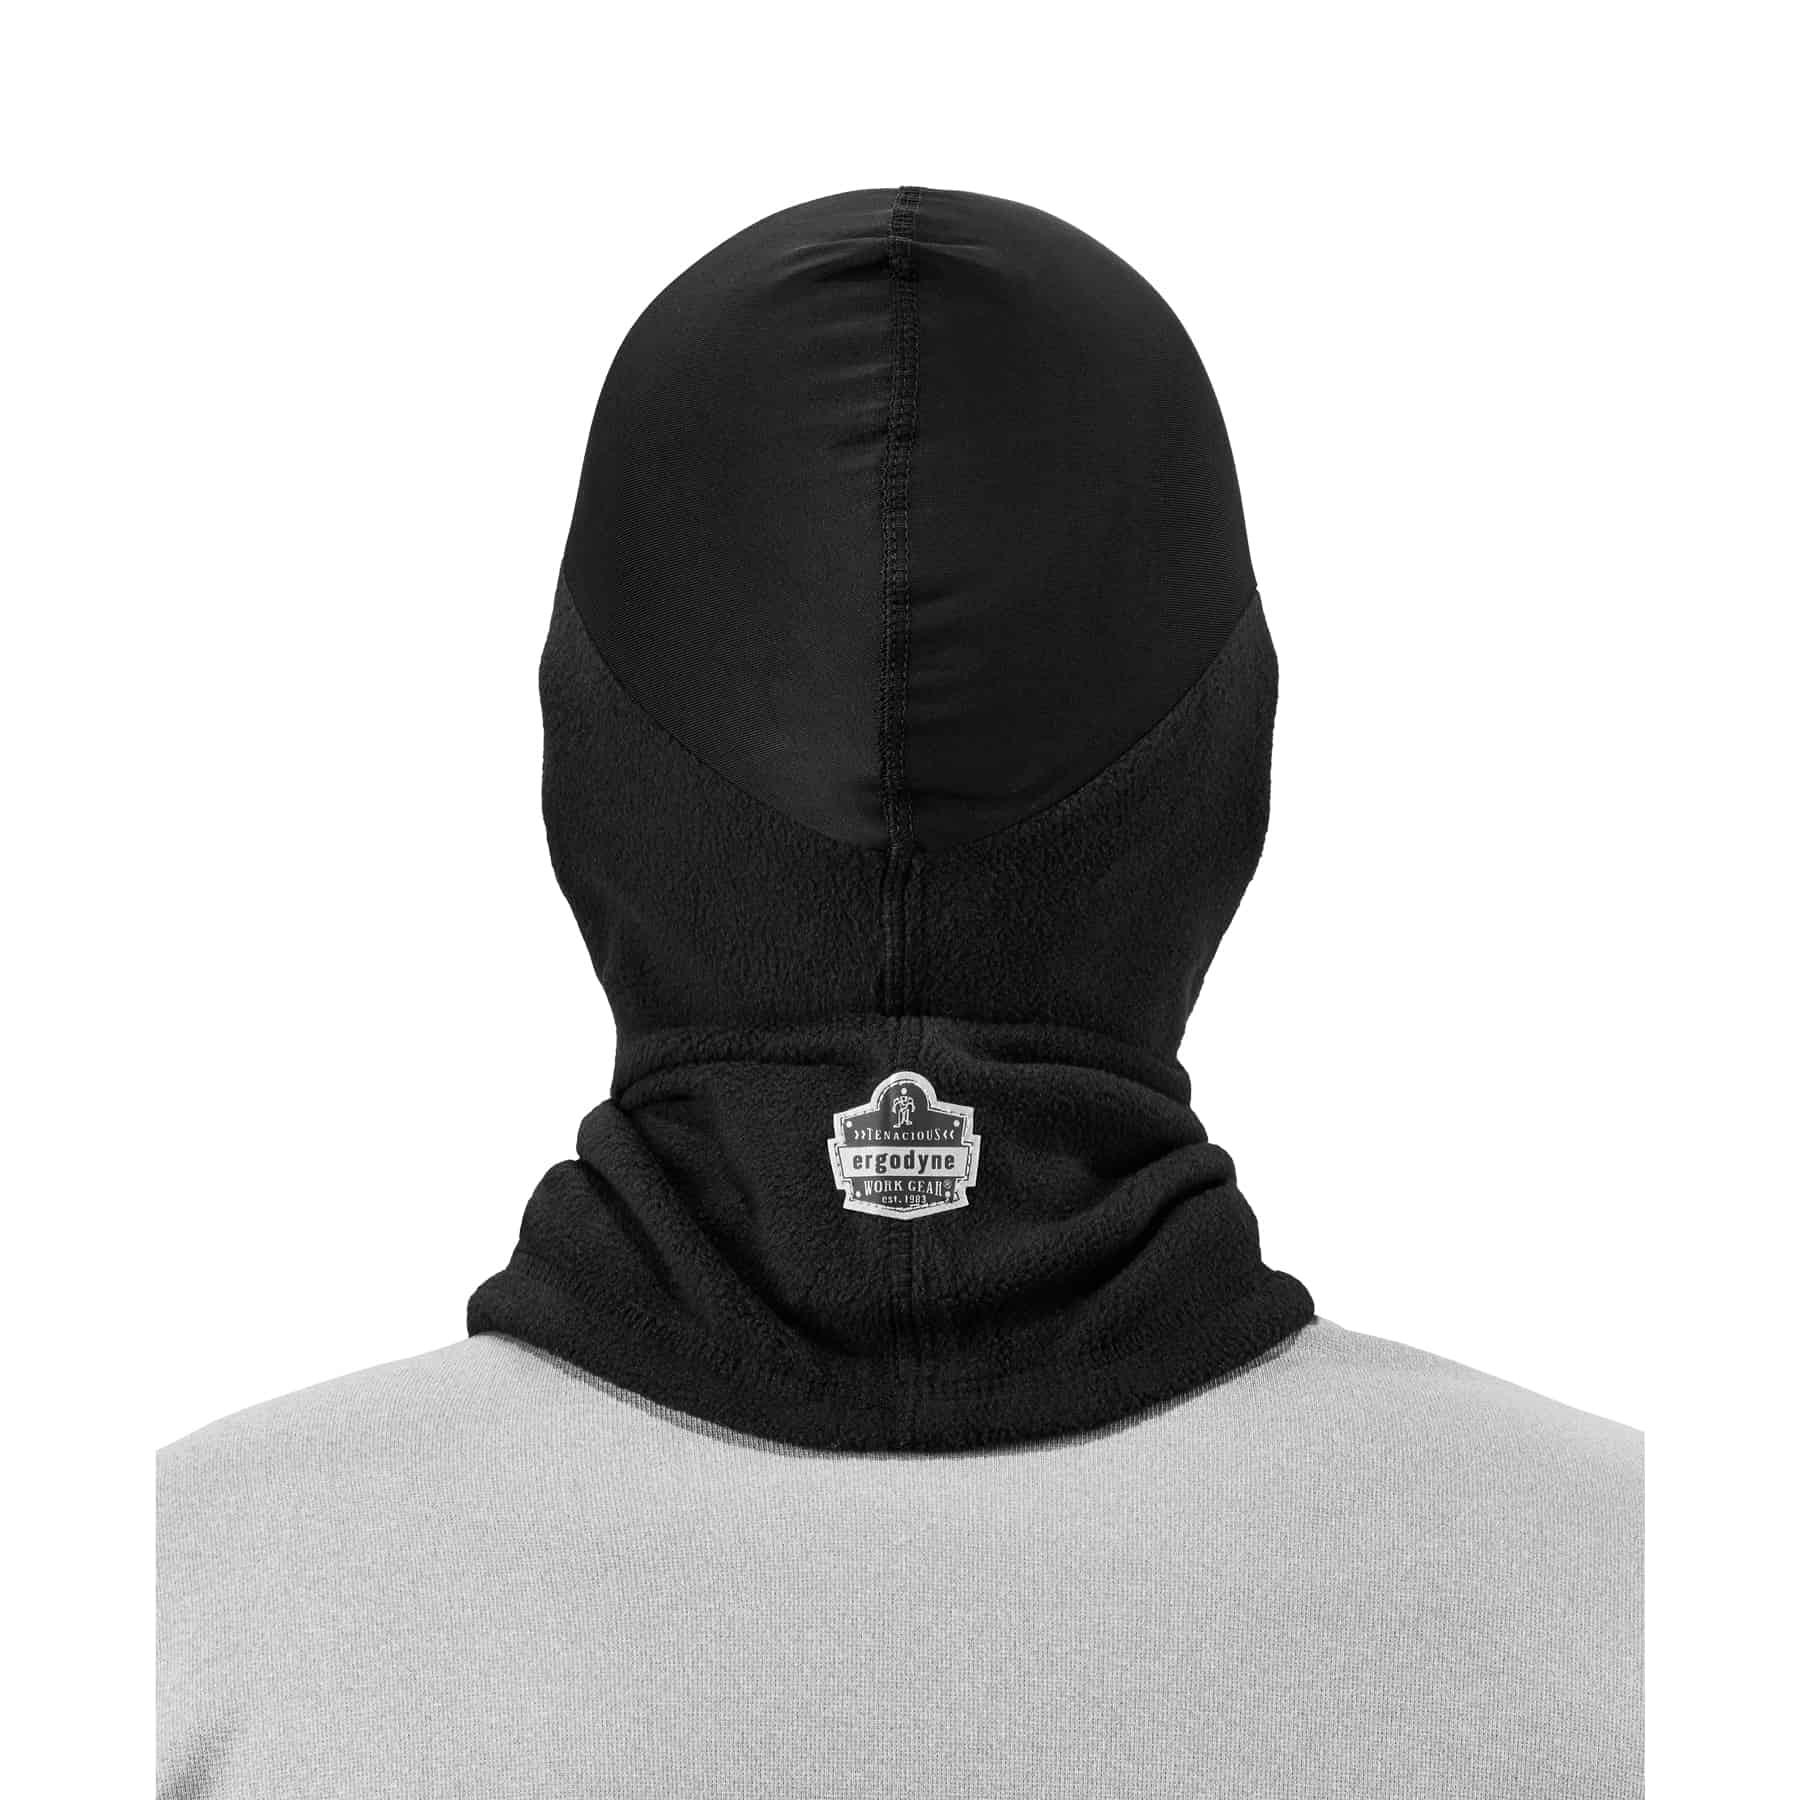 Balaclava Face Mask with Spandex Top - Warming Devices